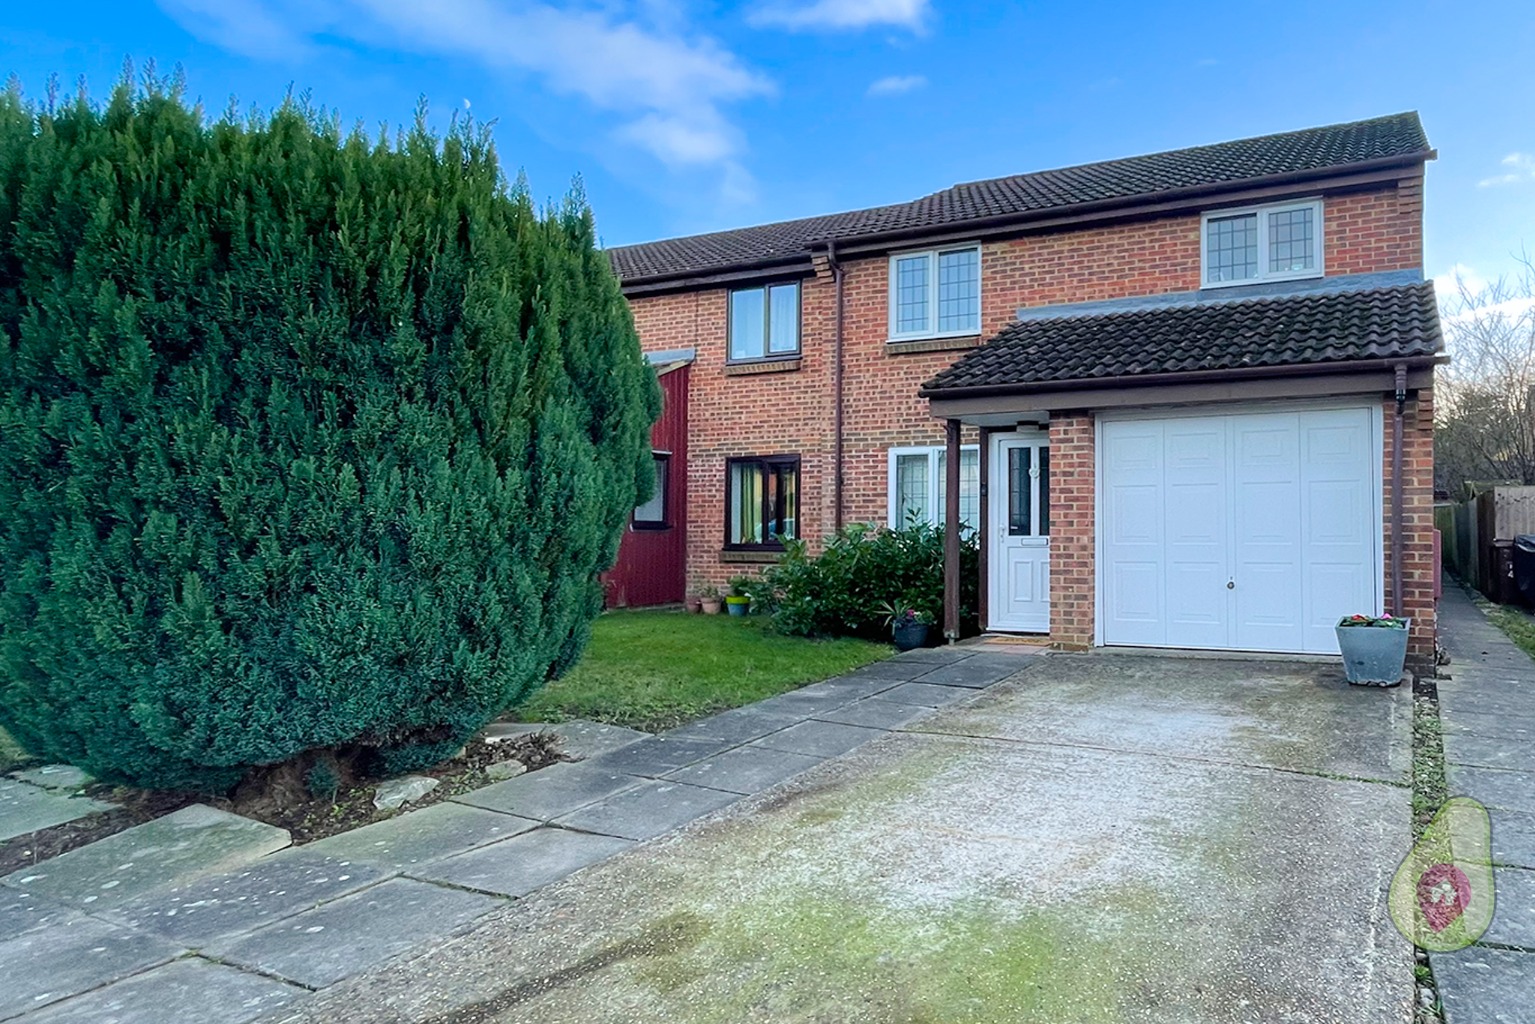 In a lovely quiet location within Forest Park, this home benefits from a good sized south facing garden. Viewings by appointment only - get in contact with us today to avoid missing out!